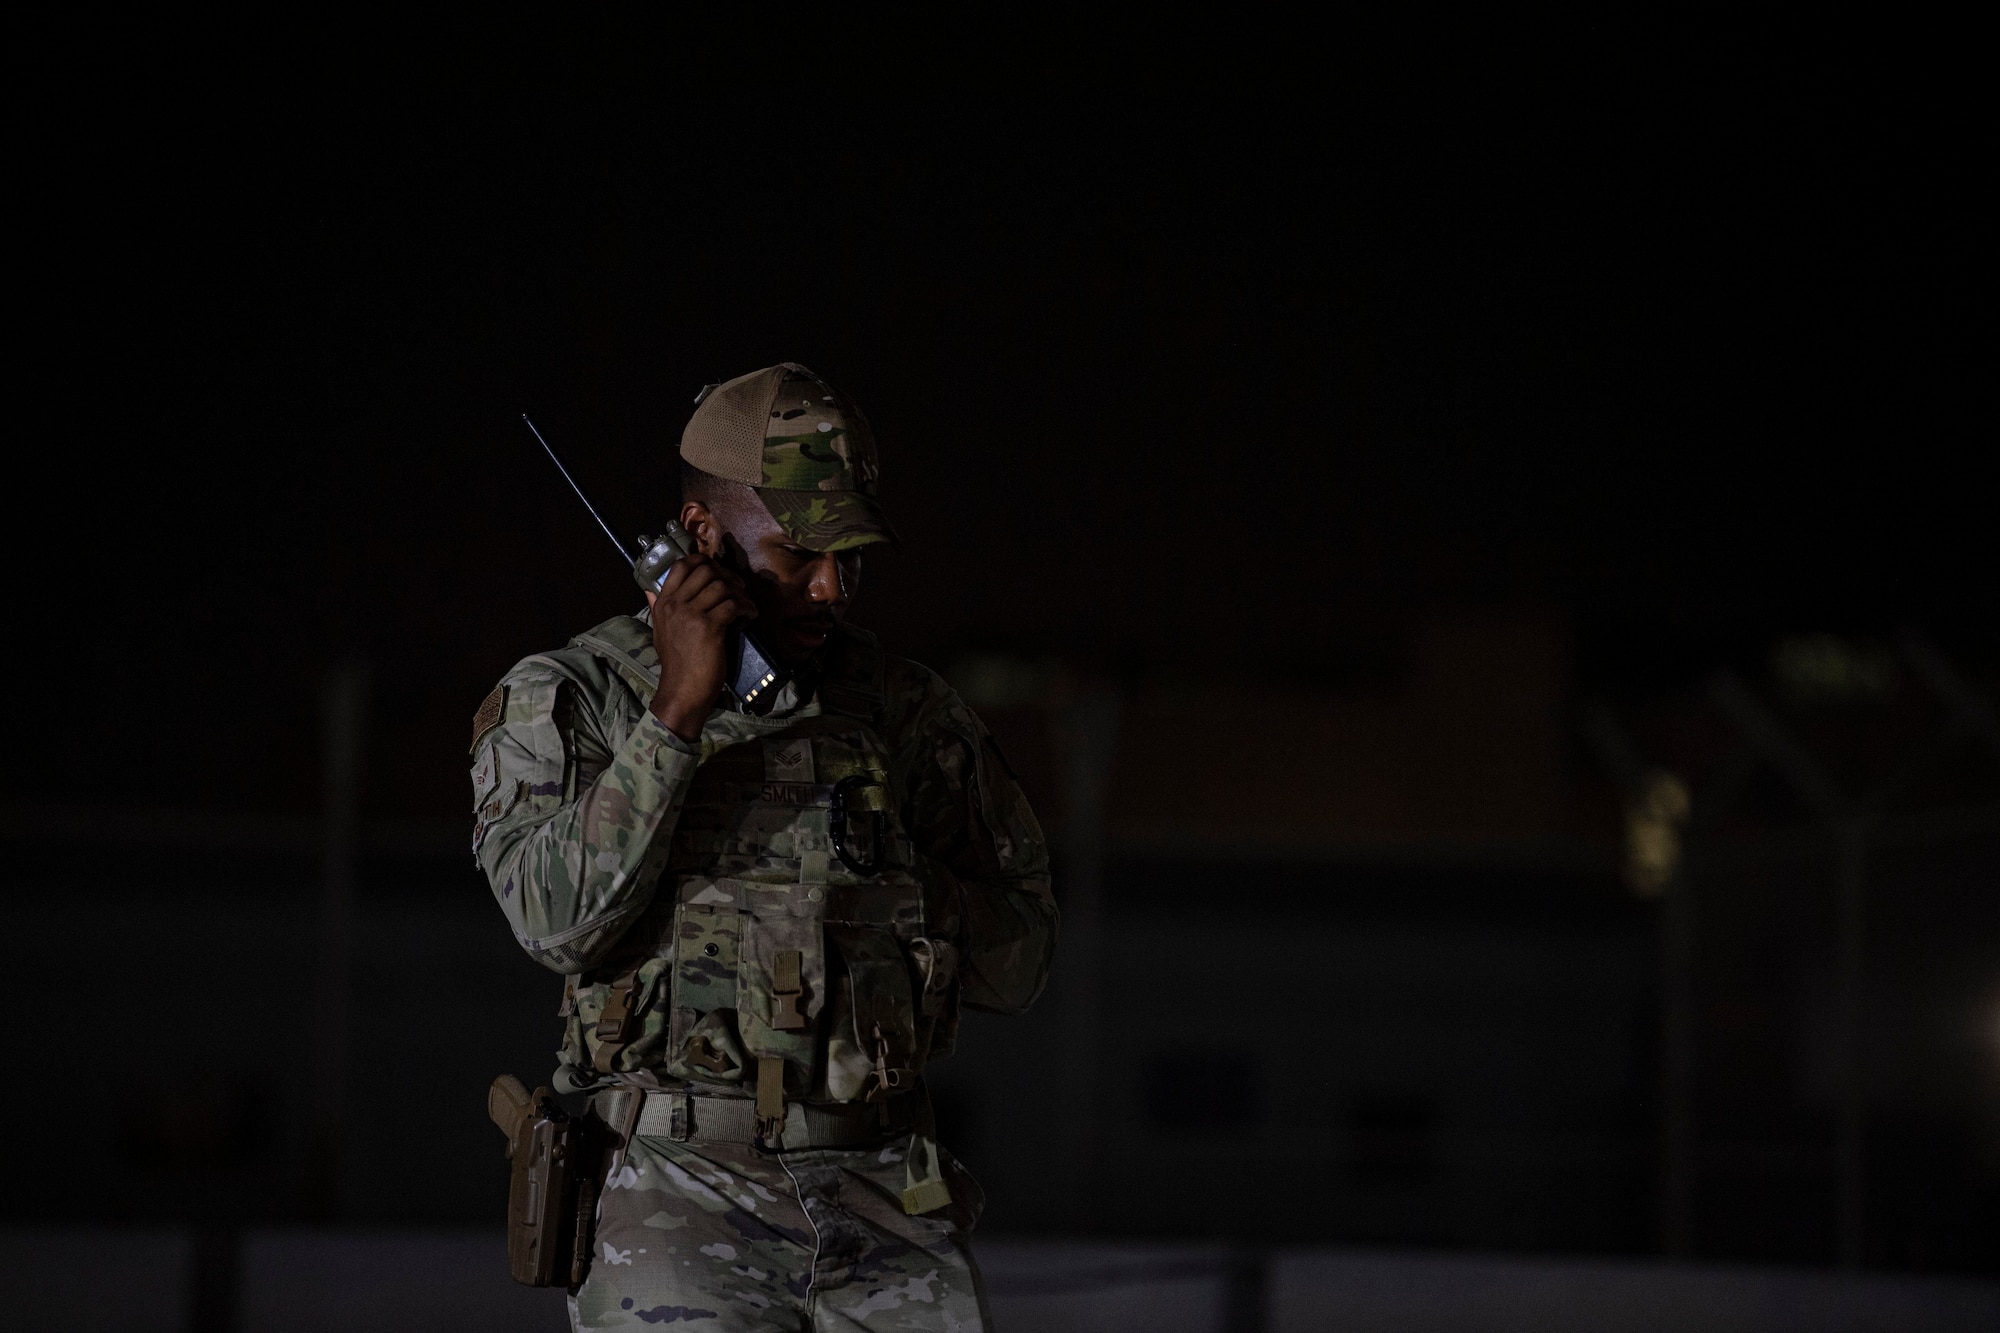 U.S. Air Force Senior Airman Samuel Smith, 379th Expeditionary Security Forces Squadron, communicates with other patrols July 25, 2022 at Al Udeid Air Base, Qatar. Security Forces Defenders keep in constant communication while securing the base and guarding key assets and infrastructure. (U.S. Air National Guard photo by Master Sgt. Michael J. Kelly)